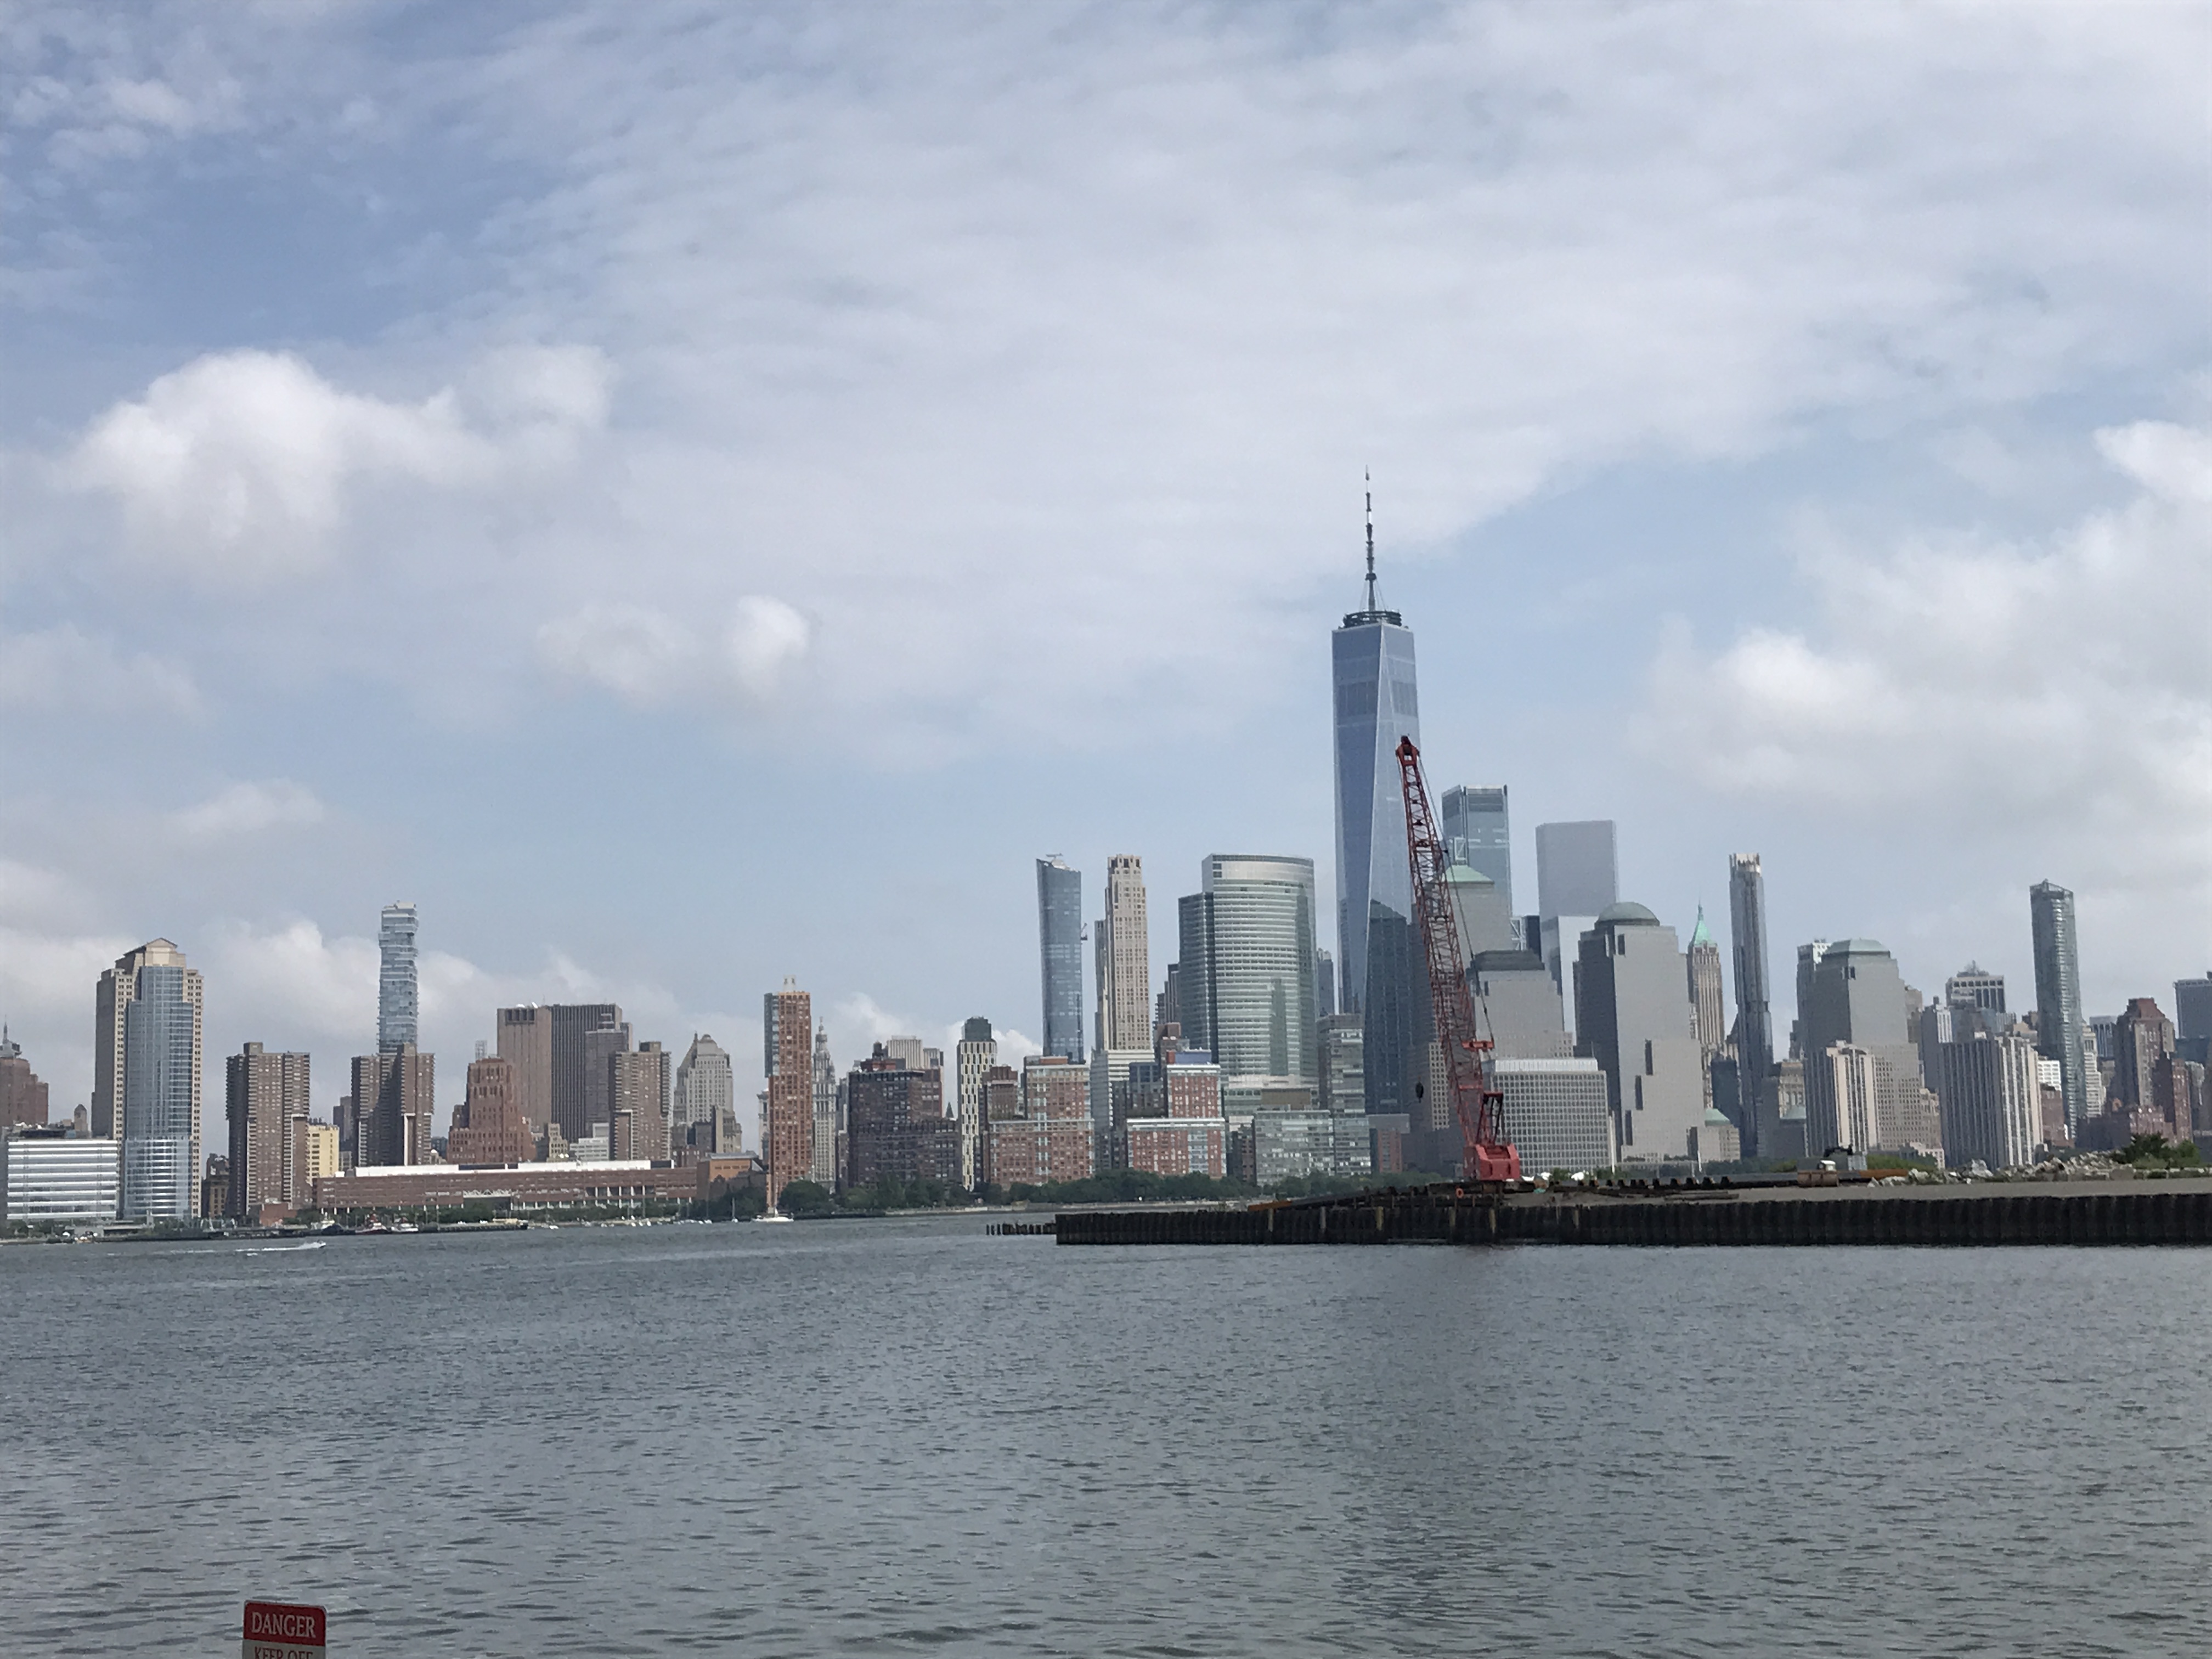 Views of the Downtown Manhattan cityscape with its tall skyscrapers, including the World Trade Center. Sky is party cloudy and blue. Jersey City, New Jersey, United States